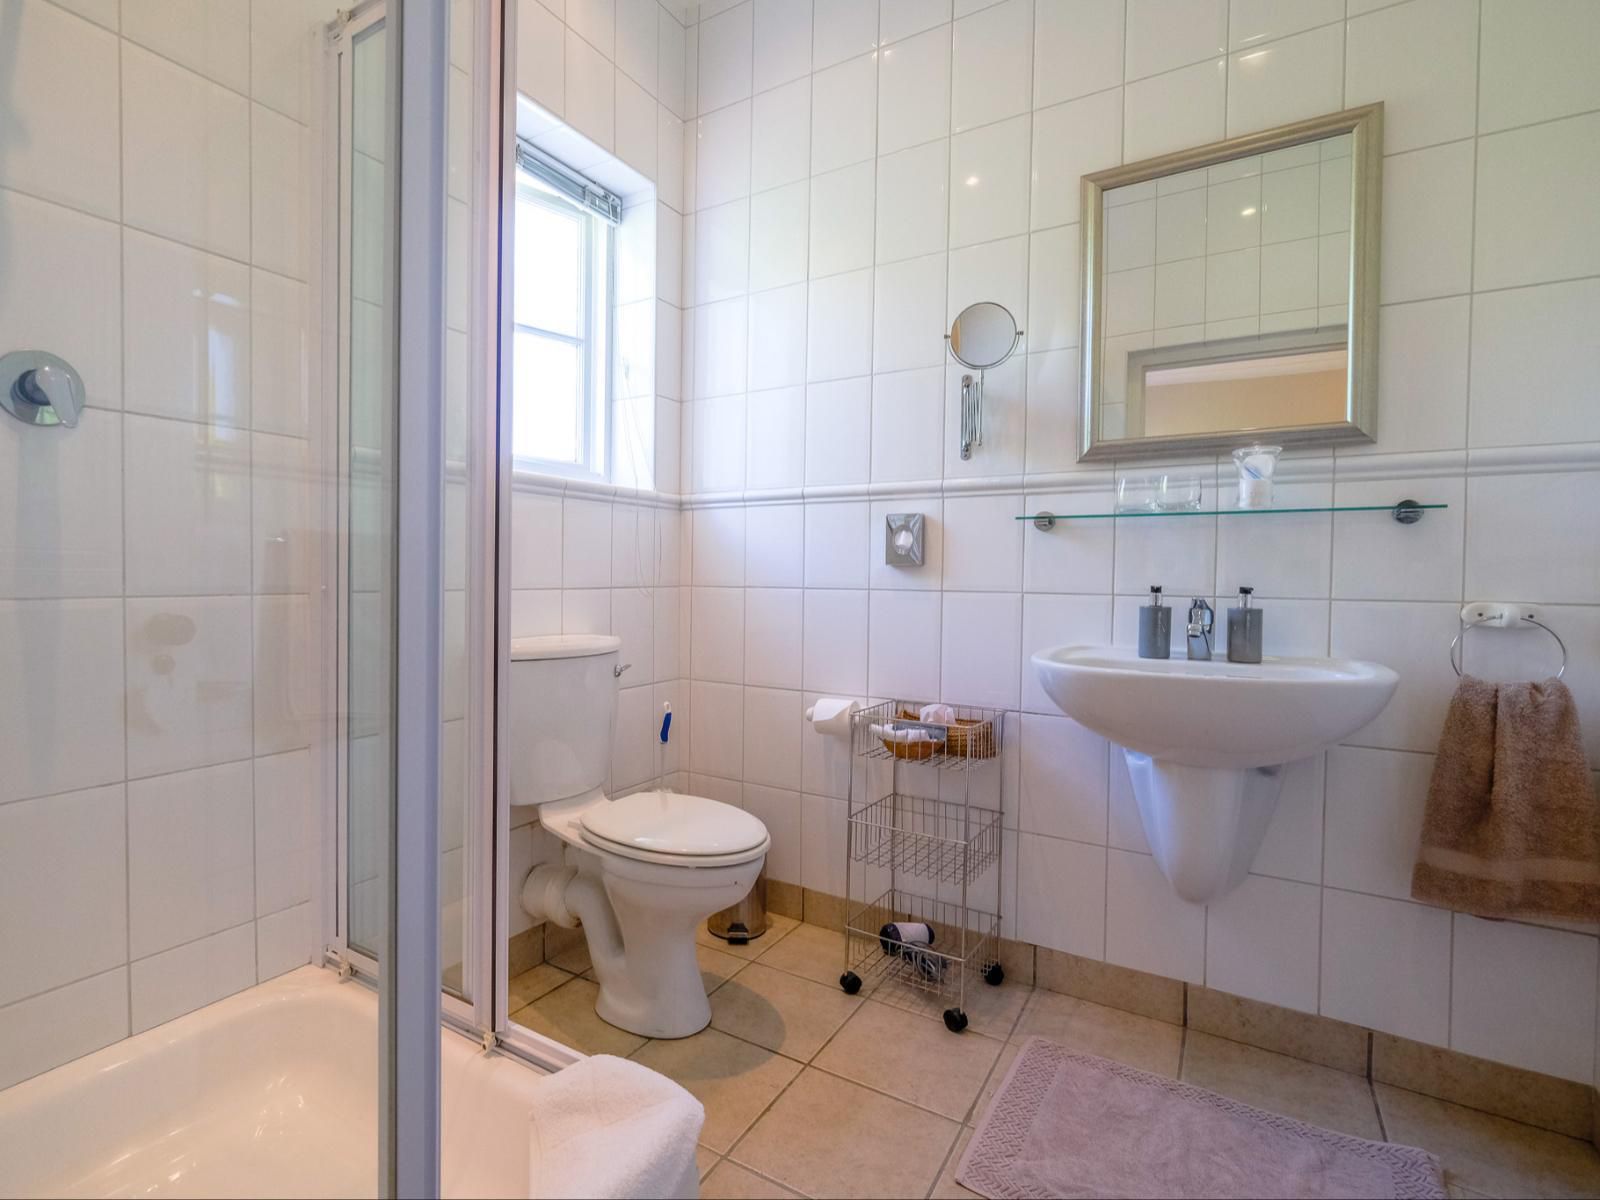 No 10 Caledon Street Guest House Camphers Drift George Western Cape South Africa Bathroom